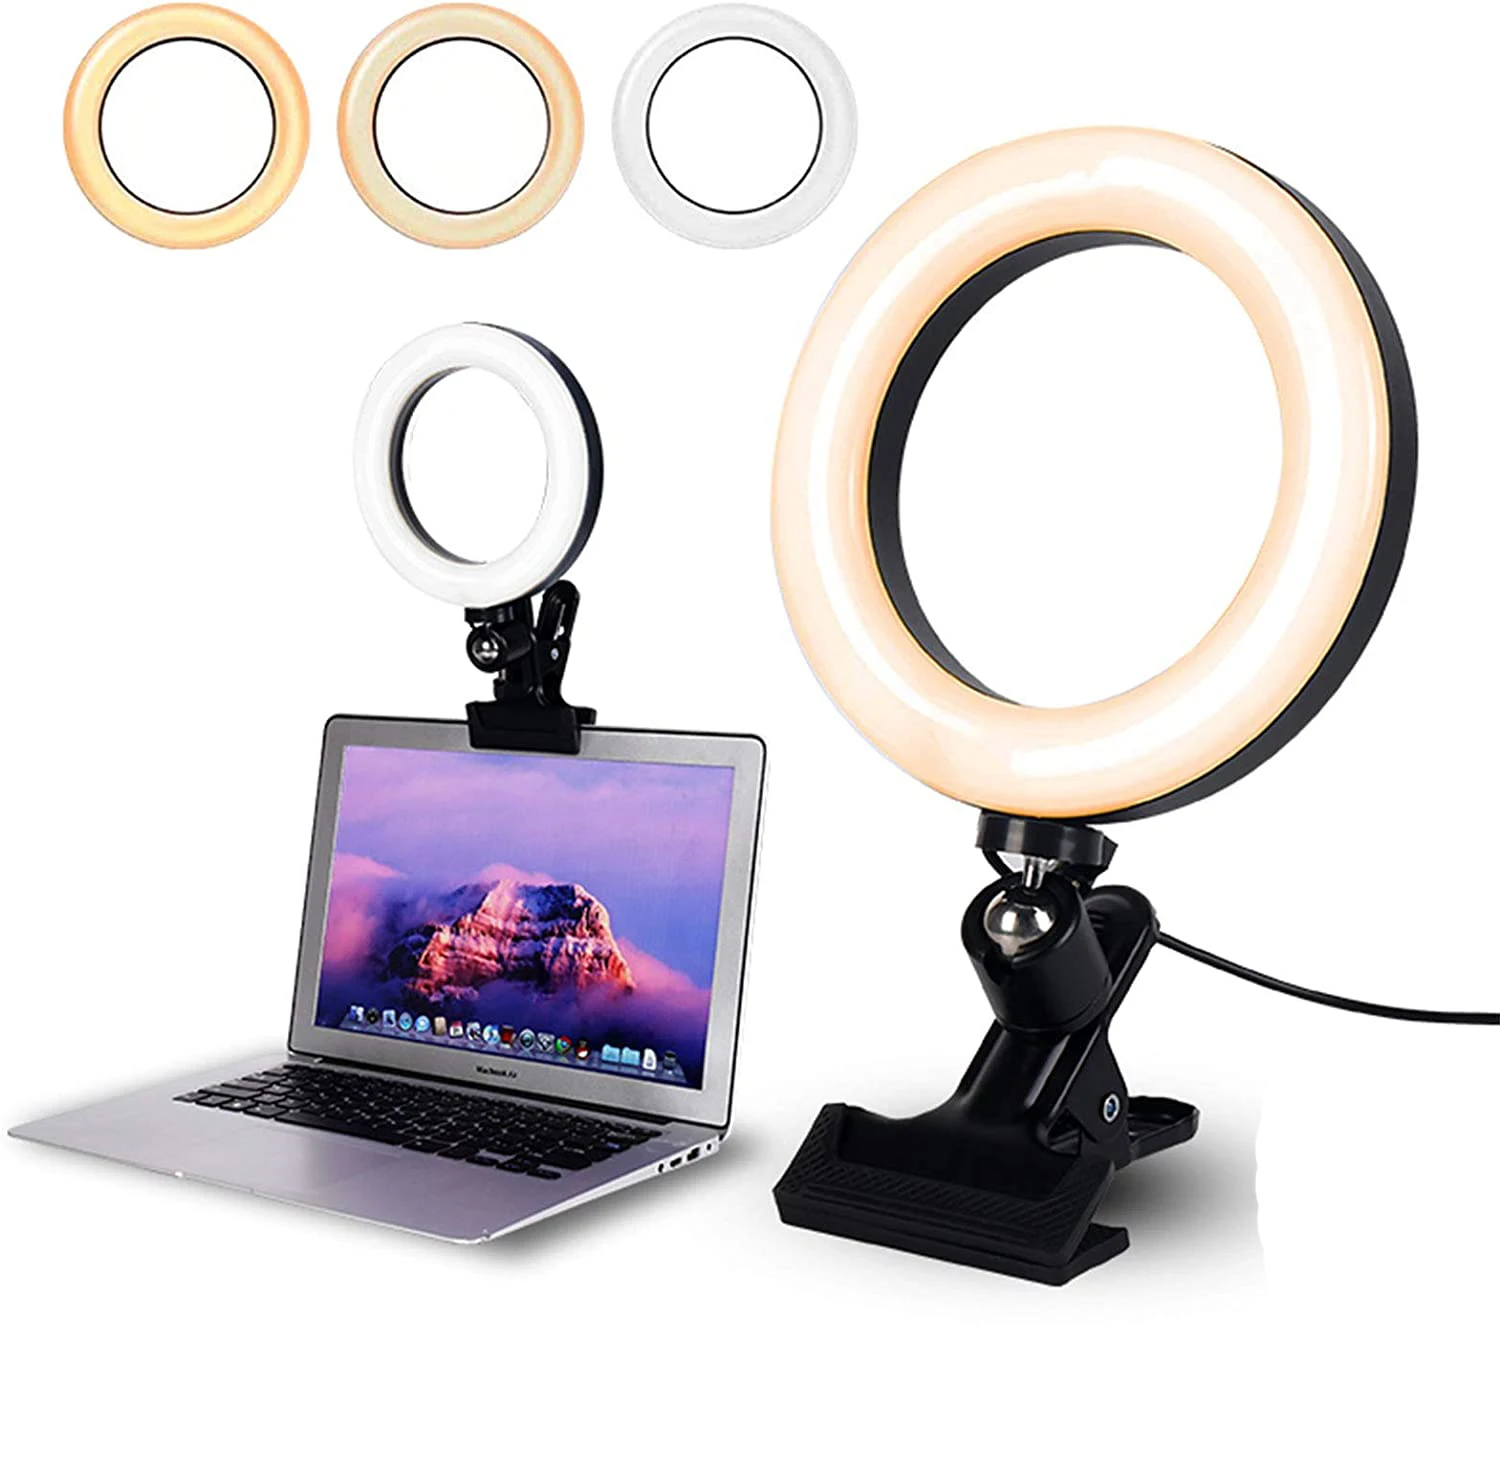 

Video Conference Lighting,6.3" Selfie Ring Light with Clamp Mount for Video Conferencing,Webcam Light with 3 Light Modes&10 Leve